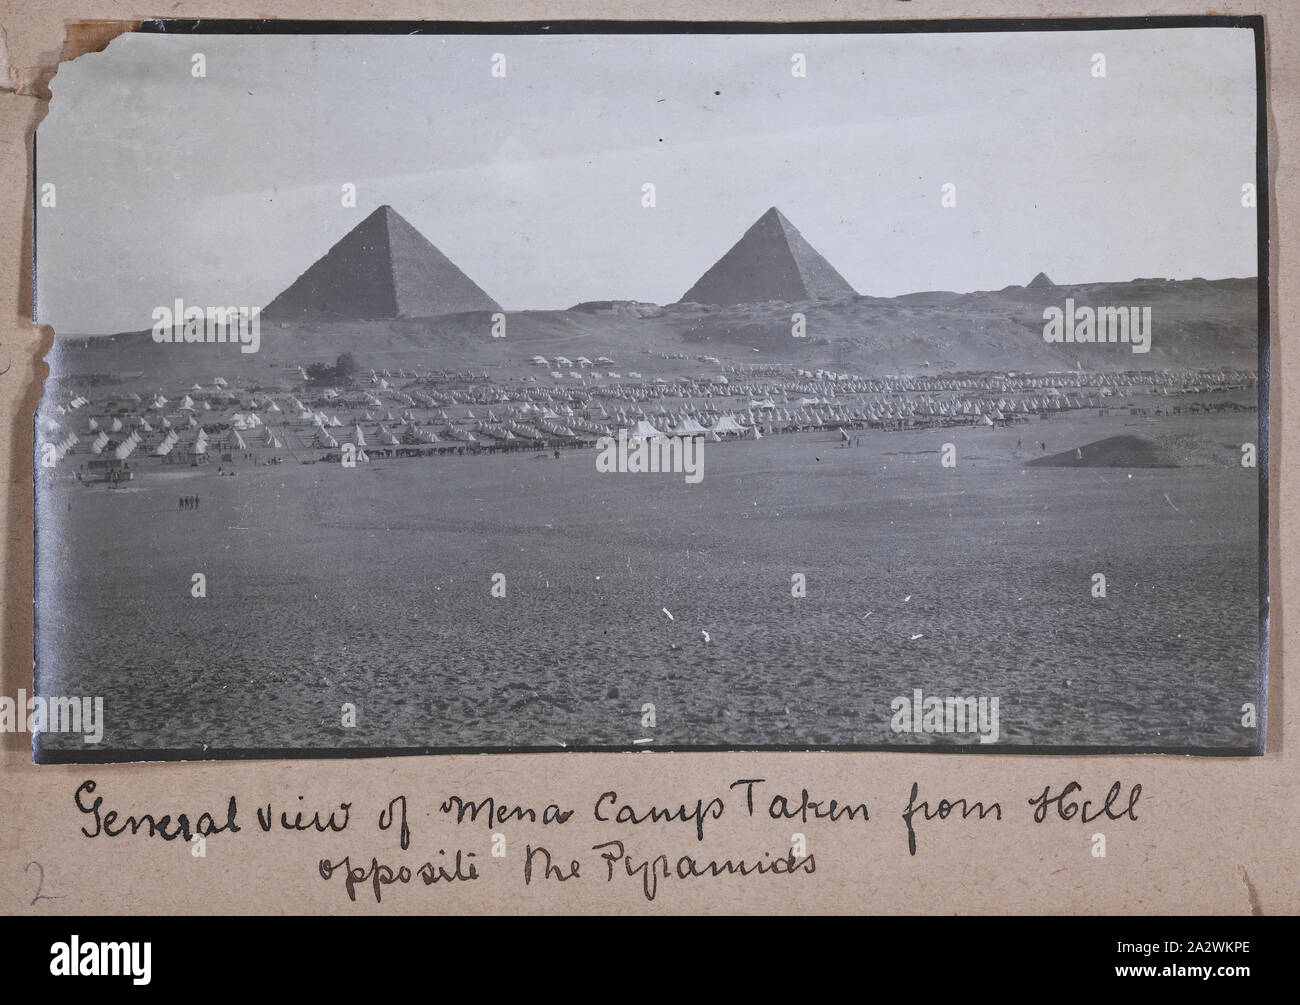 Photograph - Mena Camp & Pyramids, Egypt, Captain Edward Albert McKenna, World War I, 16 Dec 1914, One of 139 photographs in an album from World War I likely to have been taken by Captain Edward Albert McKenna. The photographs include the 7th Battalion training in Mena Camp, Egypt, and sight-seeing. Image depicting Mena Camp, Egypt, with Pyramids at Giza in the background. Mena Camp was one of three training camps in Egypt that were used by the A.I.F. and the N.Z.E.F Stock Photo